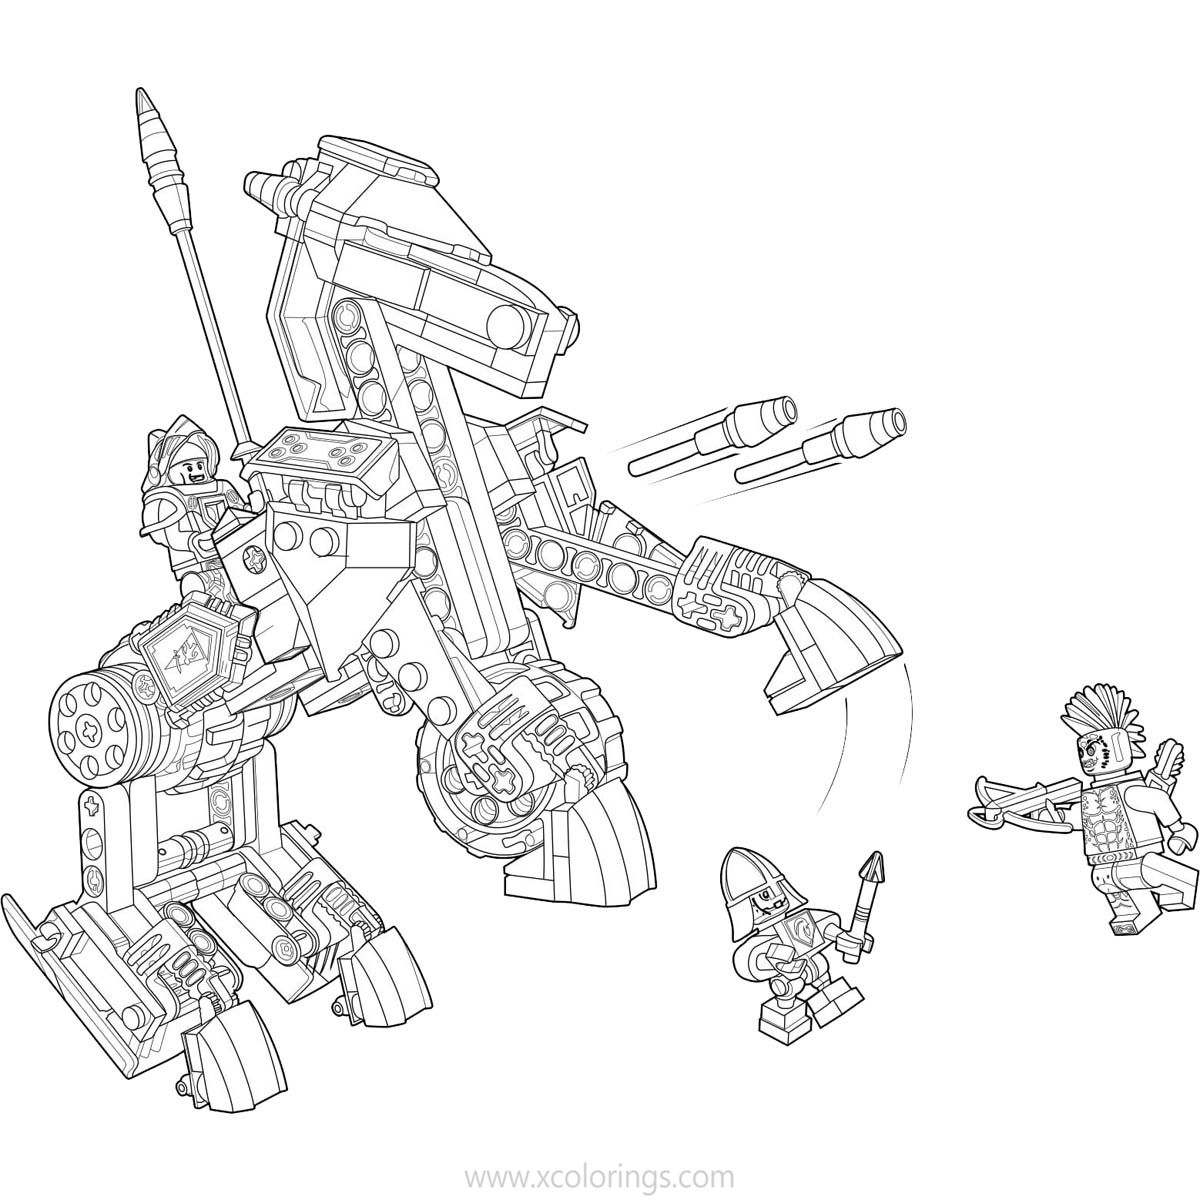 LEGO NEXO Knights Coloring Pages King Halbert - XColorings.com